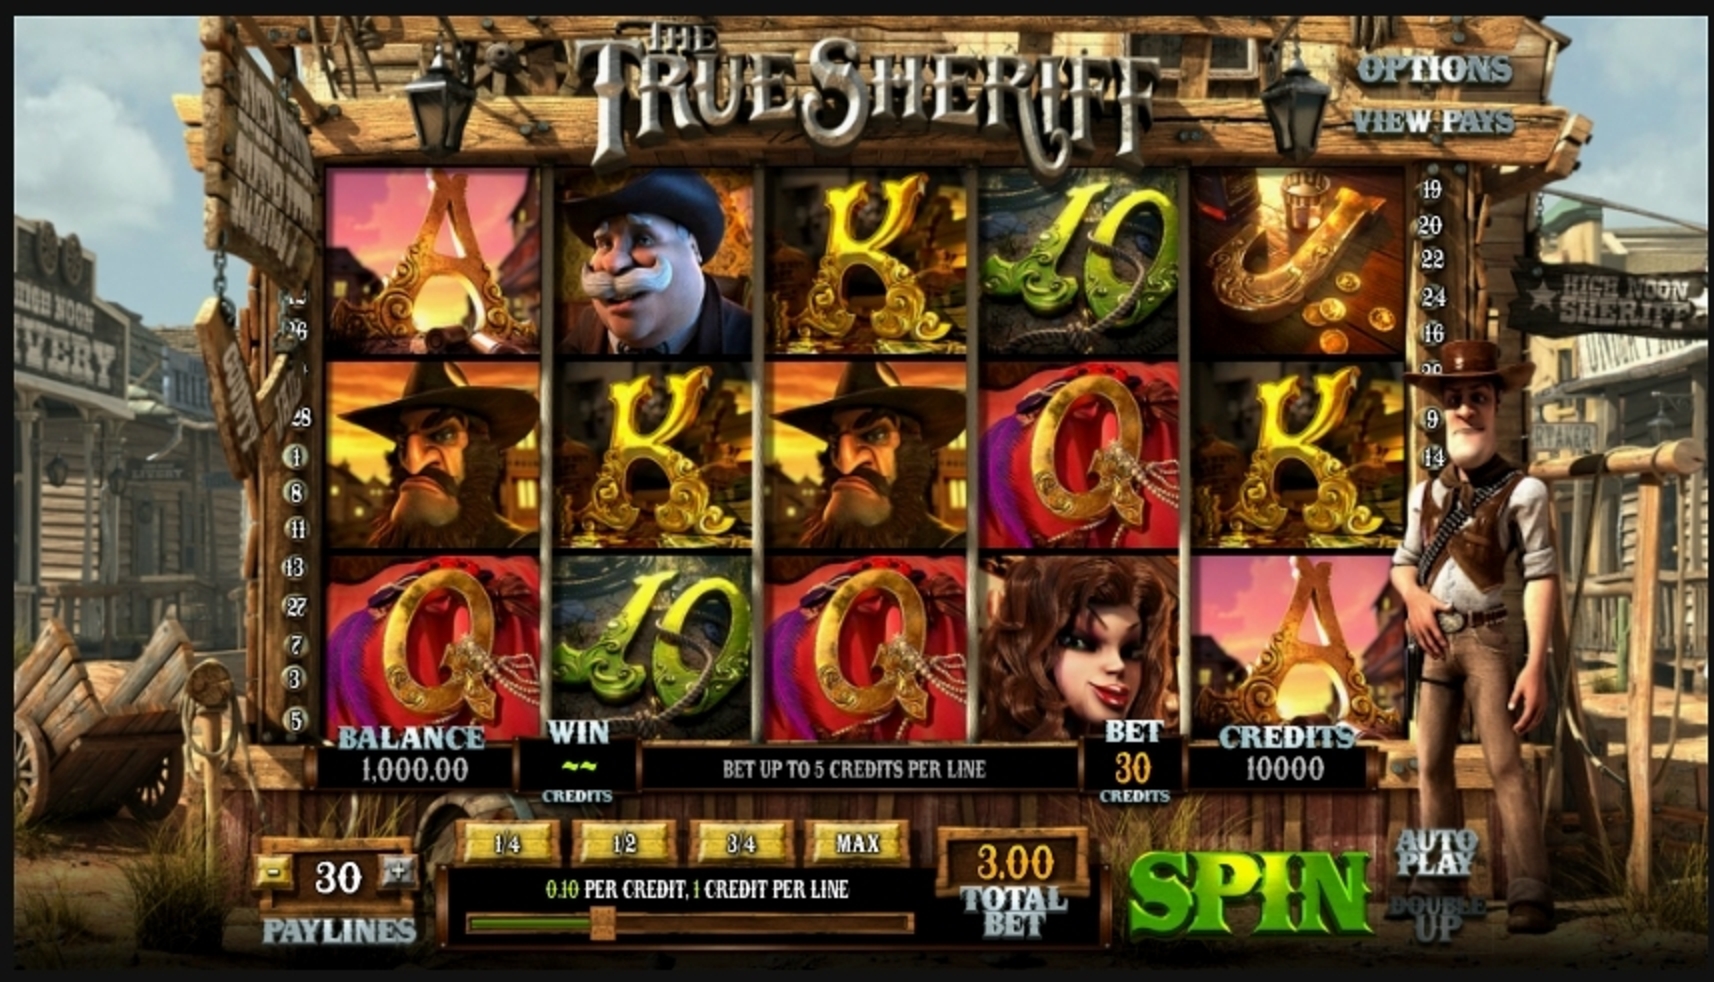 Reels in True Sheriff Slot Game by Betsoft